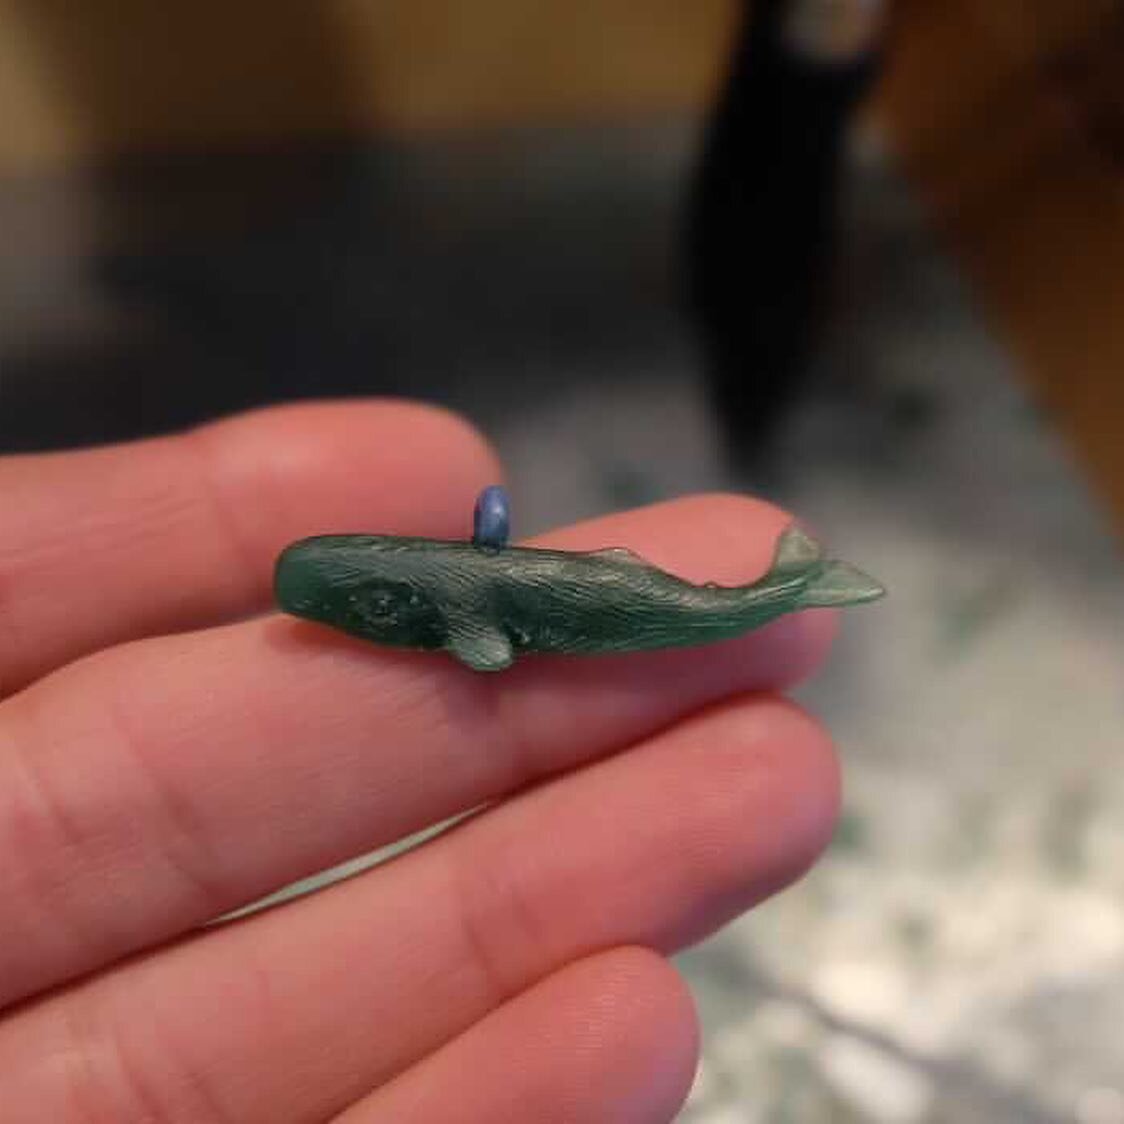 I&rsquo;m excited to announce that I have partnered with the amazing jeweler, @brookekanani to bring you these little gems which will be cast in sterling silver! 

From Brooke:
Meet Physty - modeled in wax after a young sperm whale who was found ill 